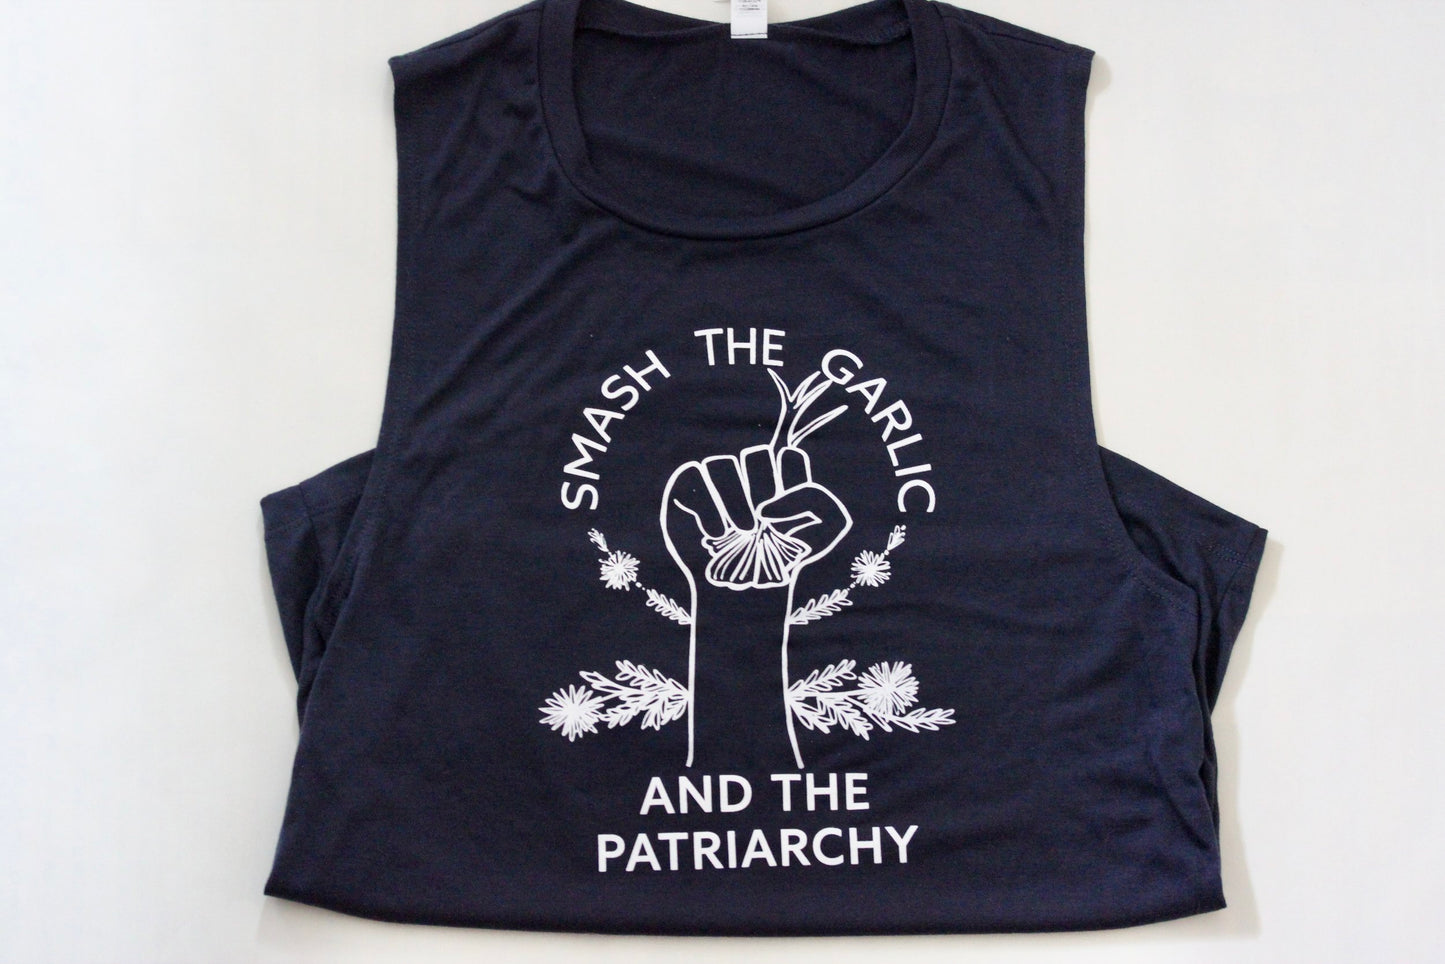 A navy blue tank with "Smash the Garlic and the Patriarchy" in white letters and an illustration of a hand holding garlic